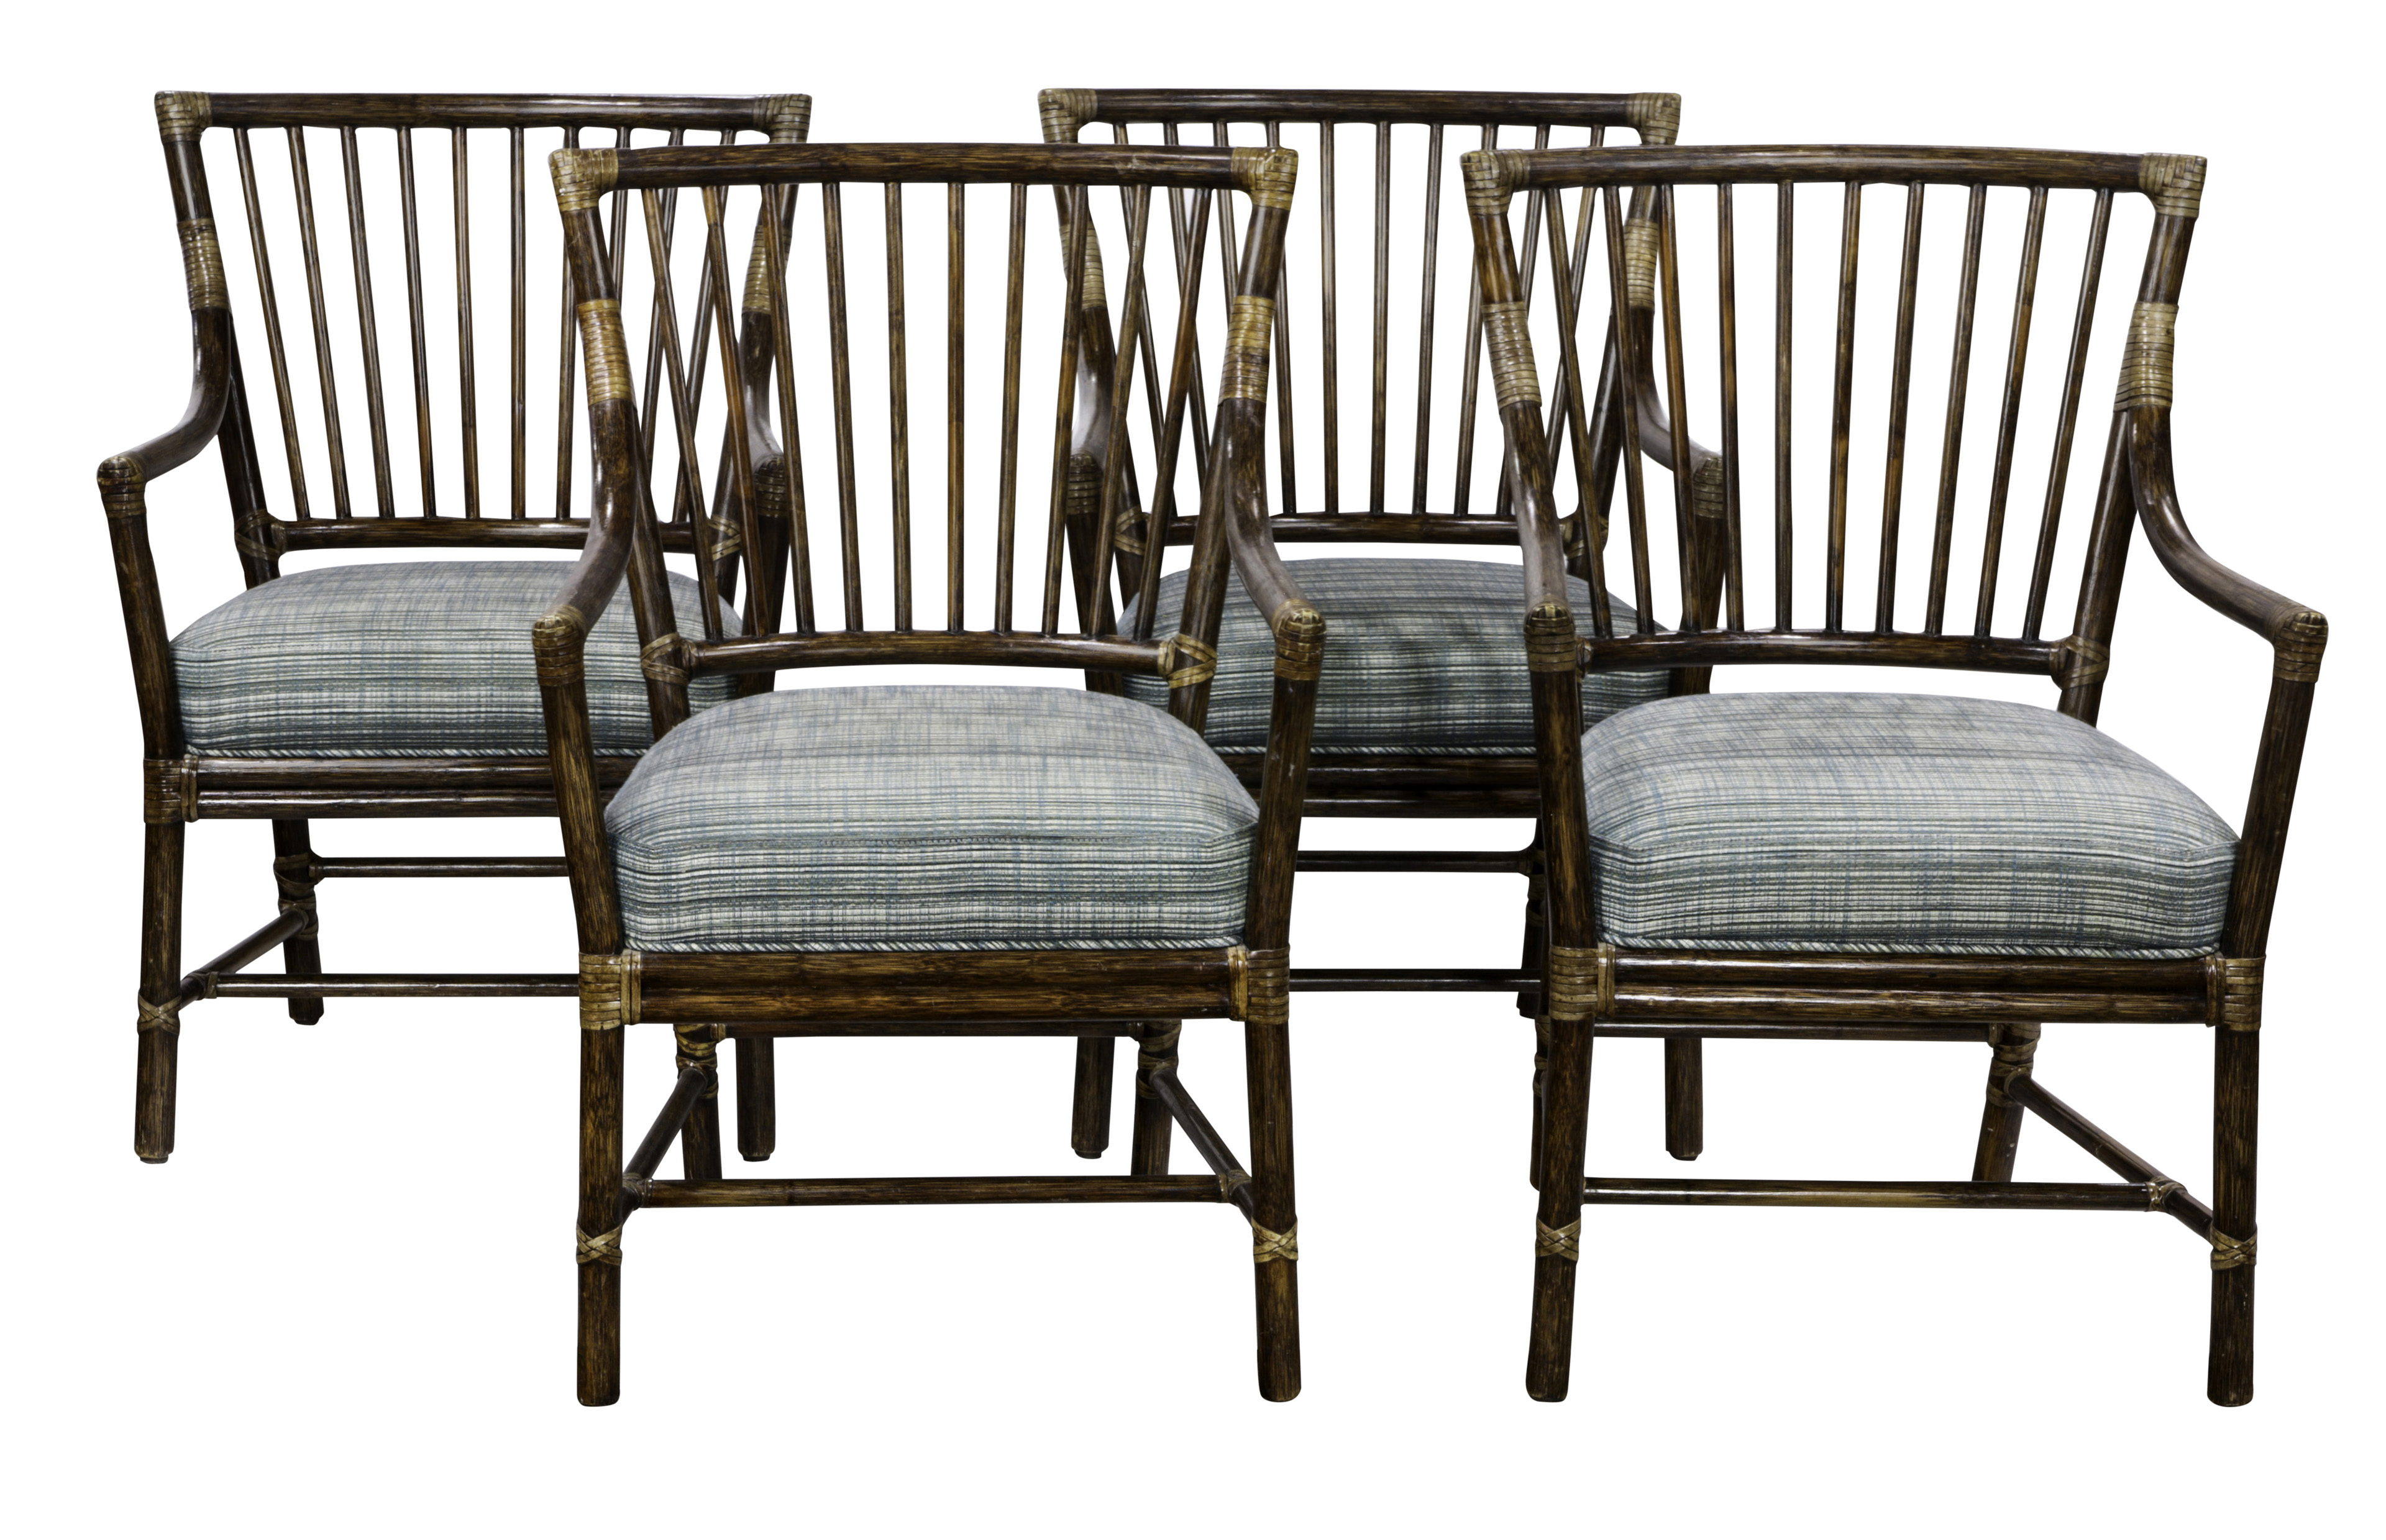  LOT OF 4 MCGUIRE ARMCHAIR GROUP 3a5abe